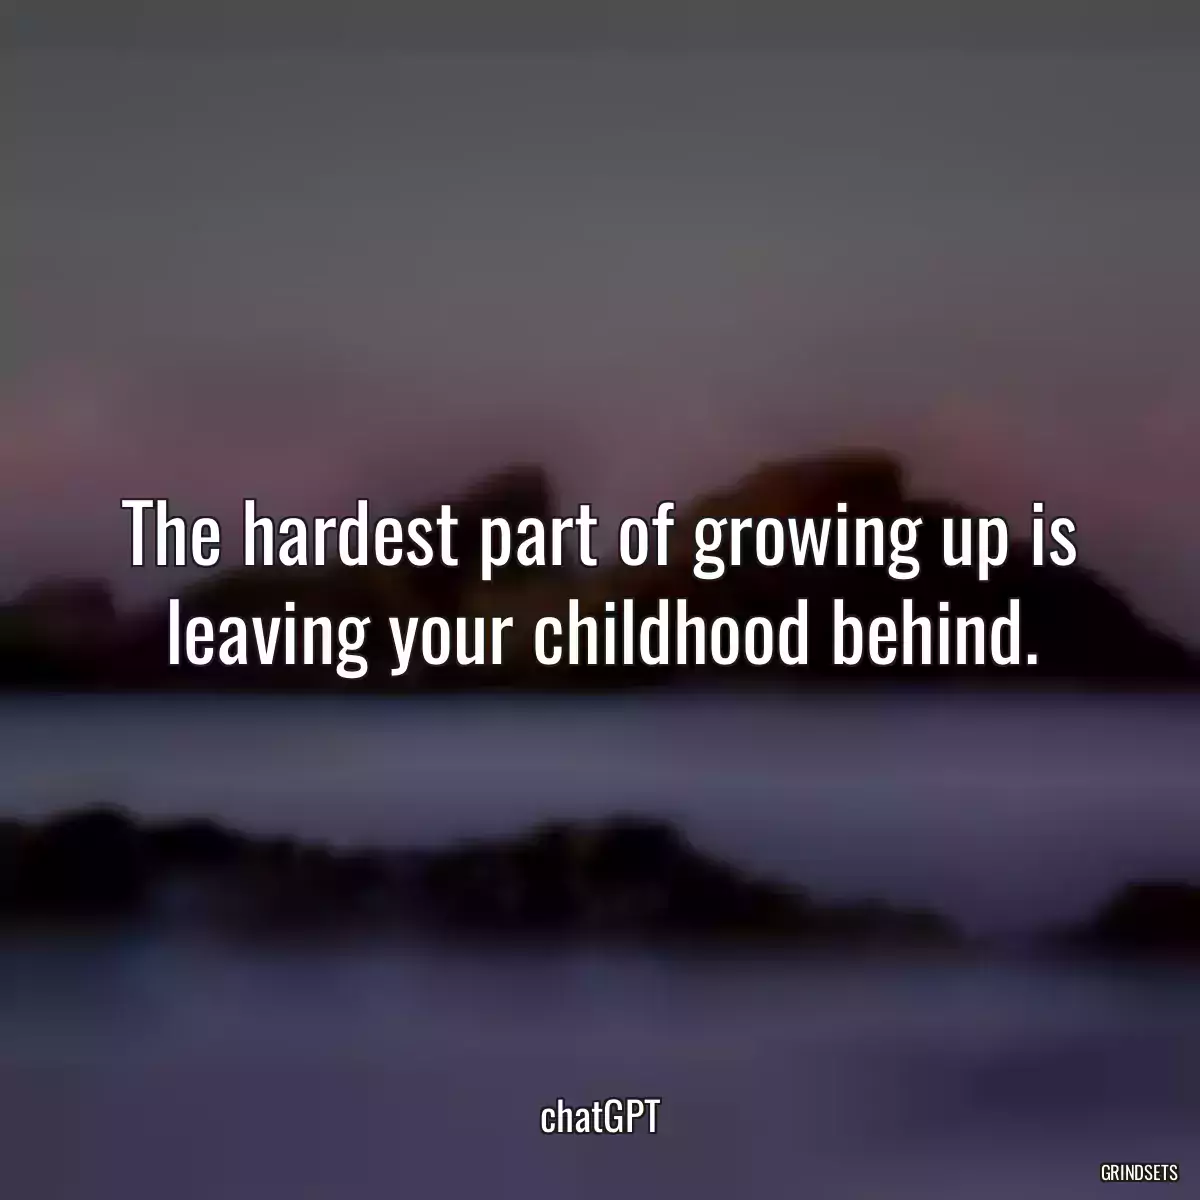 The hardest part of growing up is leaving your childhood behind.